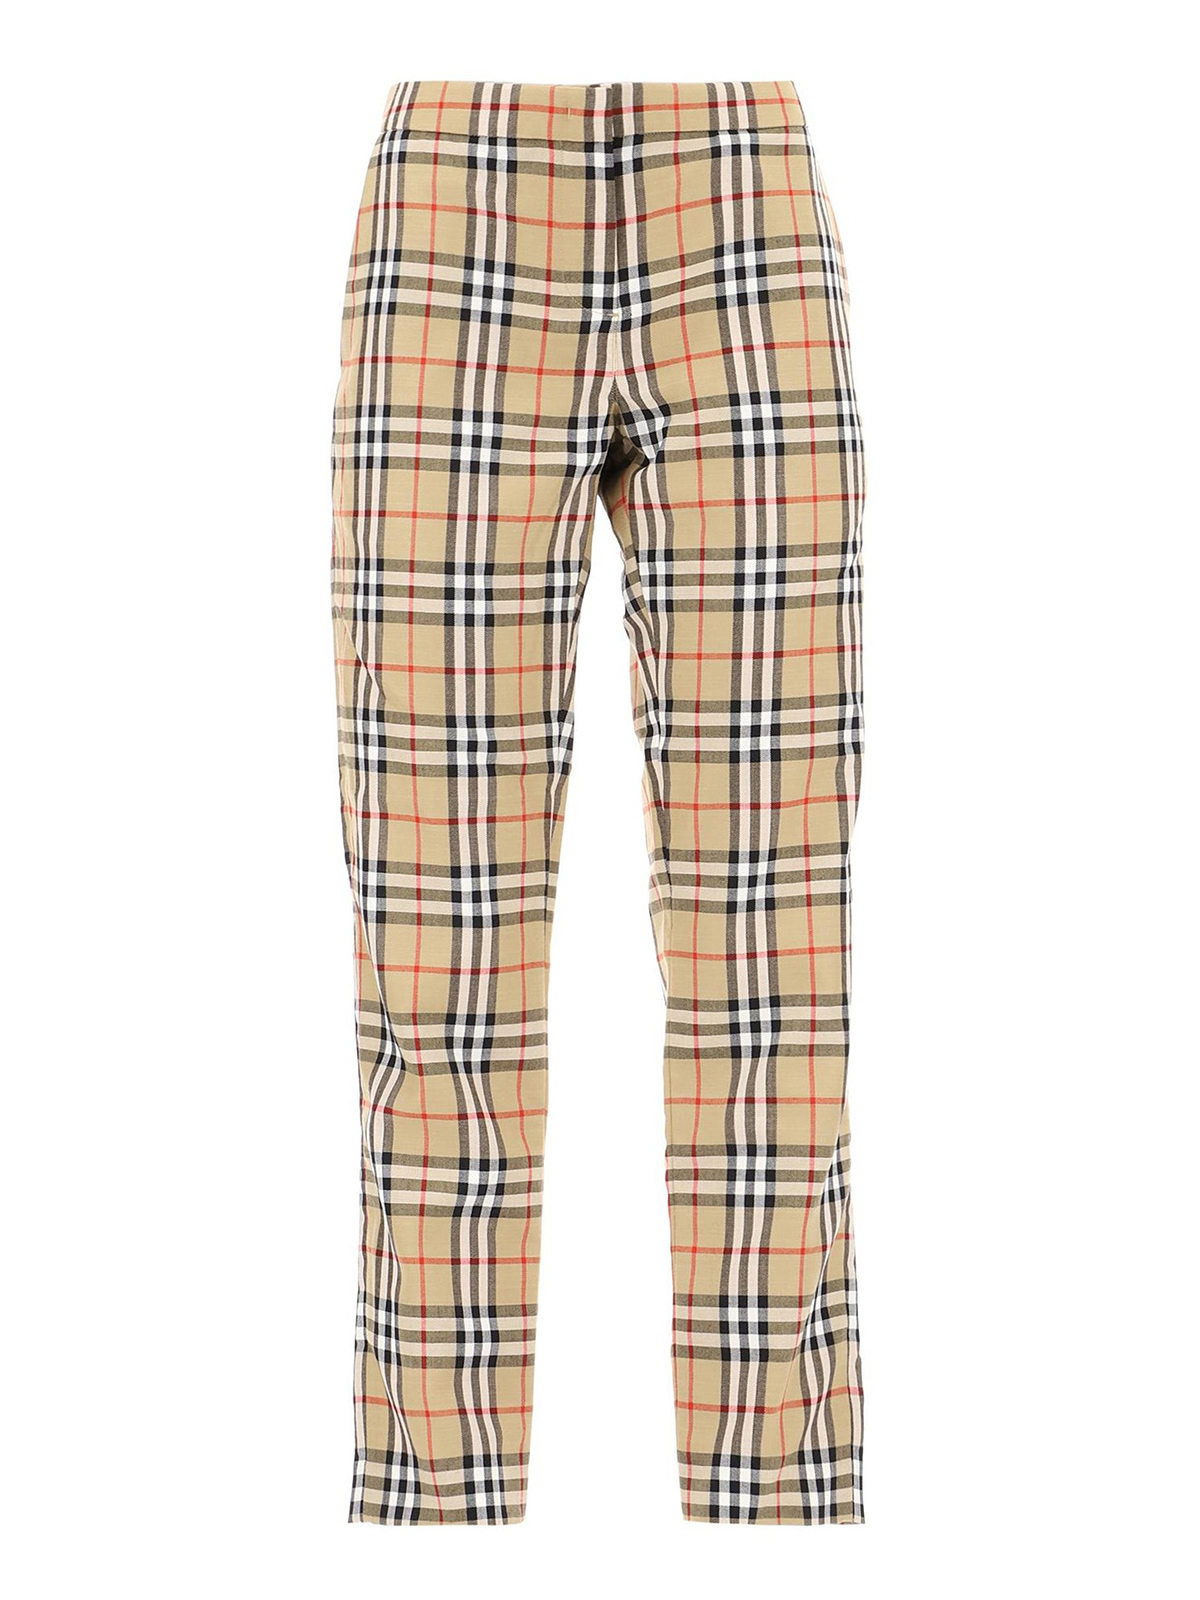 Burberry - Check print trousers 